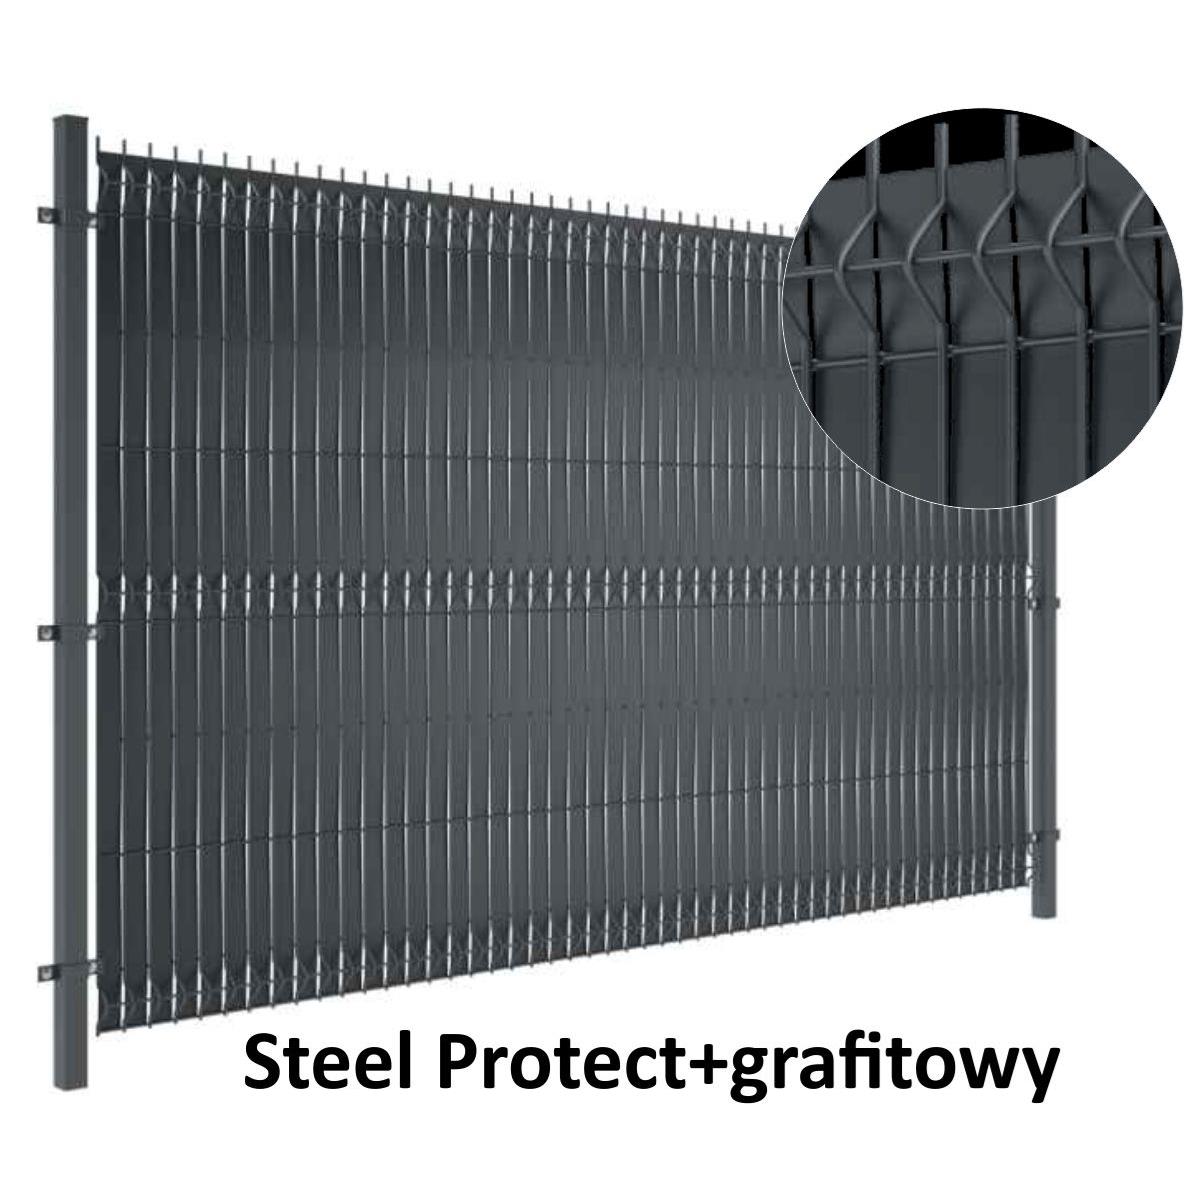 Steel-Protect-Grafitowy-Panel-System-Group